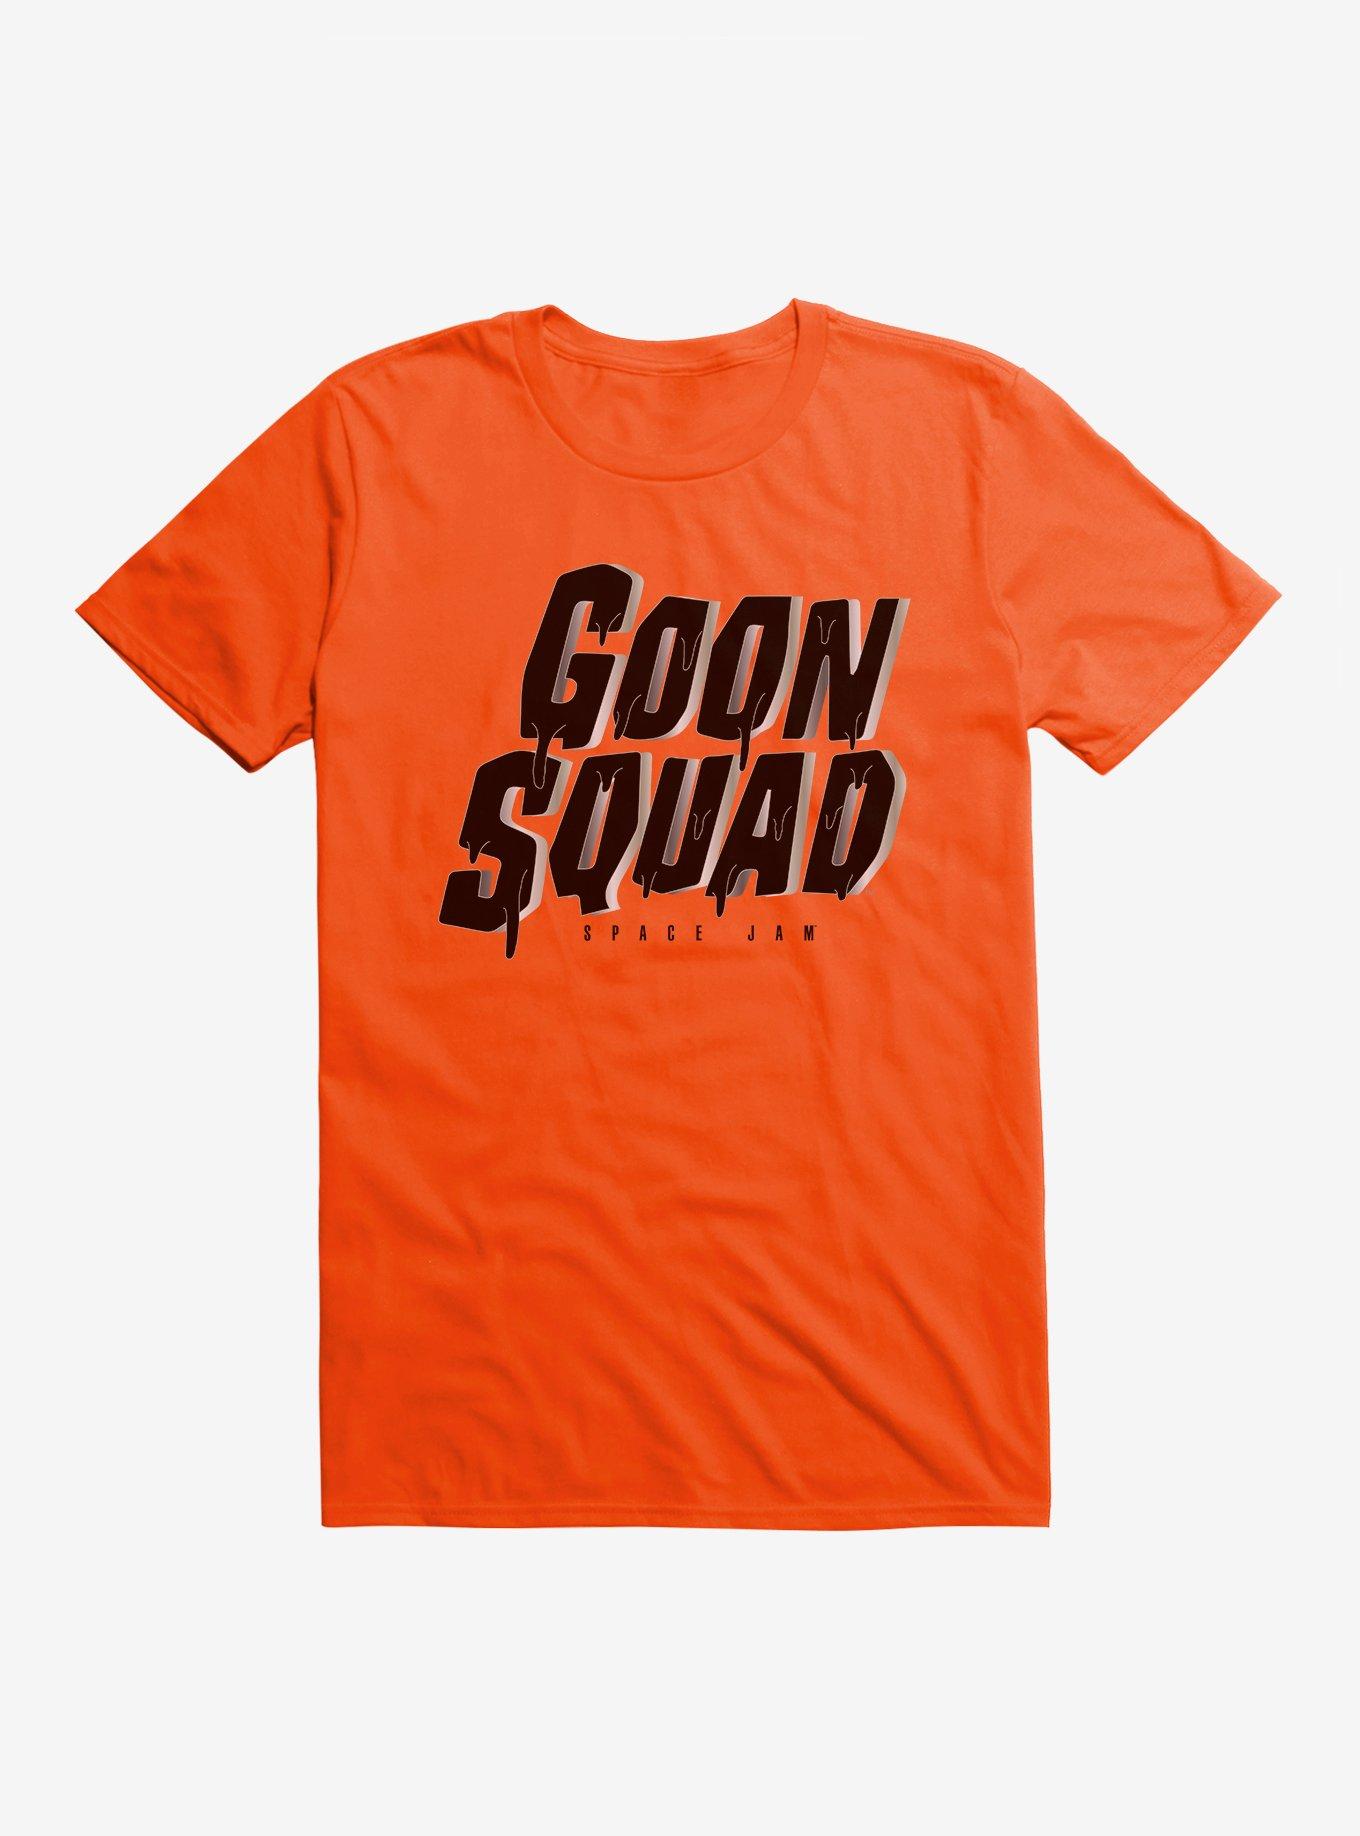 Goon Squad Clothing: Street Wear For Everyone! by Goon Squad